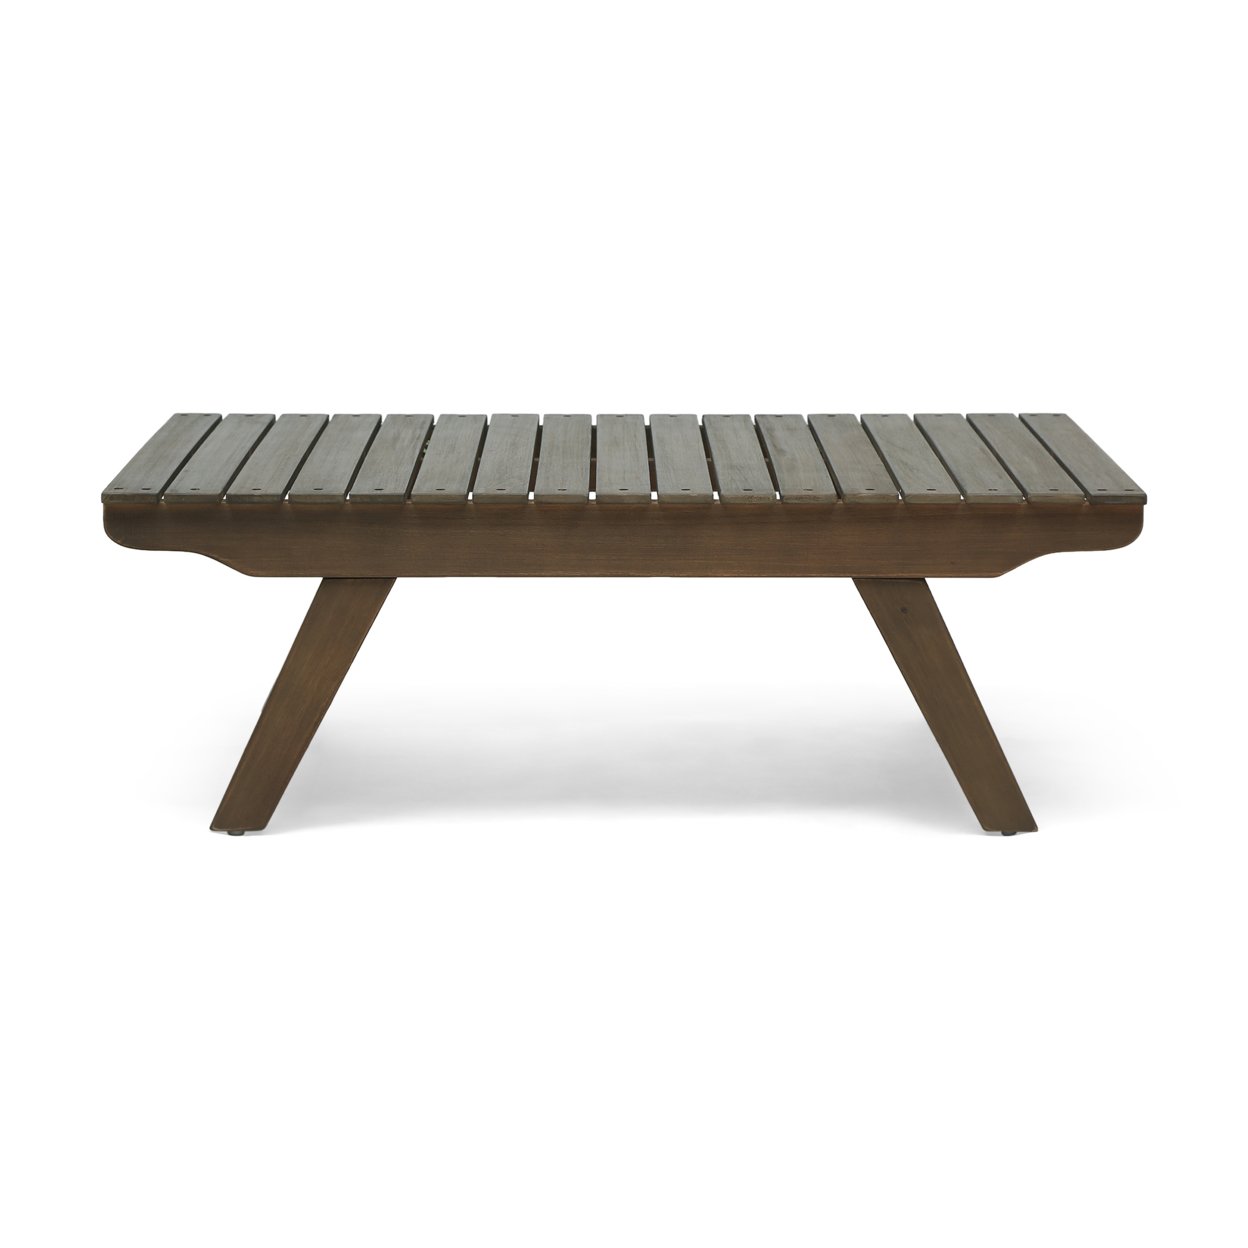 Kailee Outdoor Wooden Coffee Table - Gray Finish